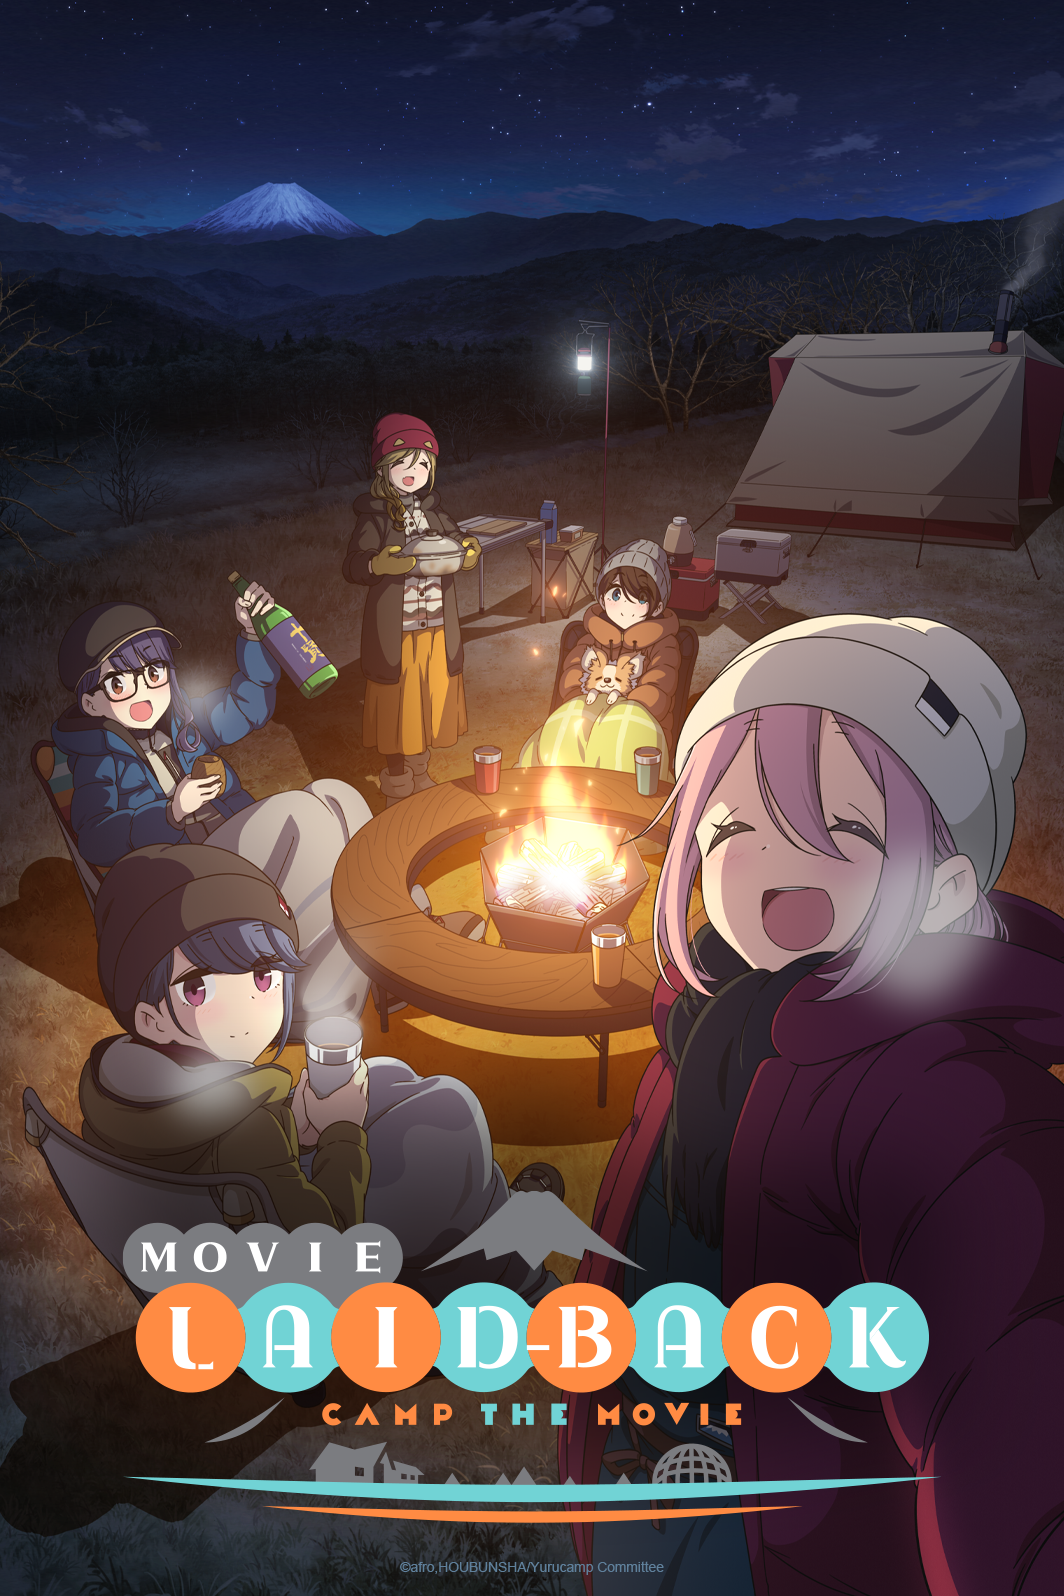 Relaxed camp the movie